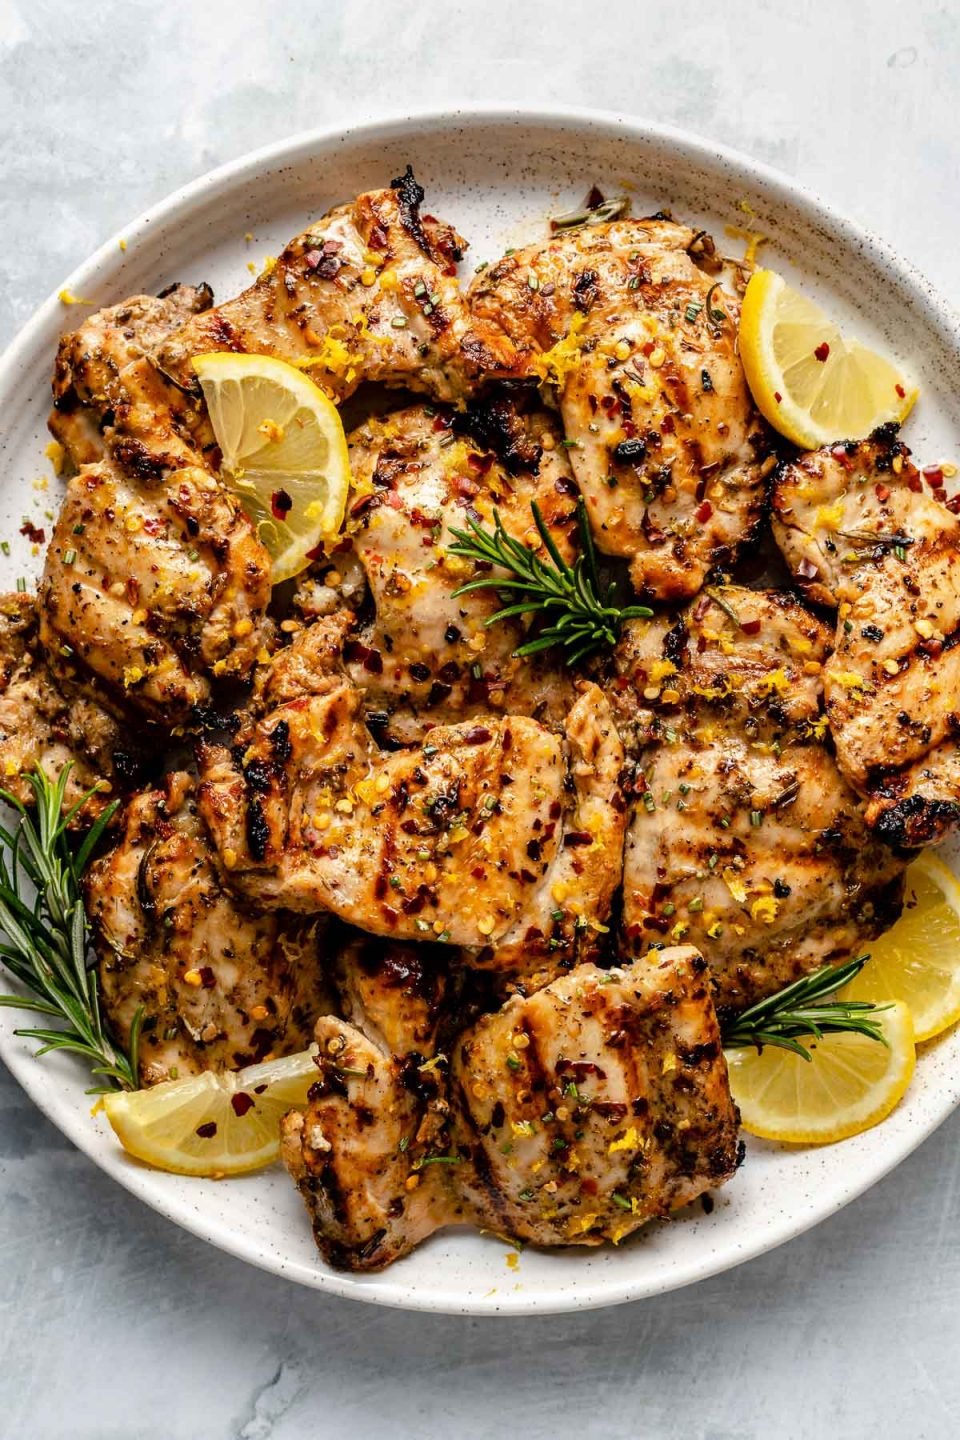 Grilled Tuscan chicken thighs shown on a white speckled plate atop a light blue surface. The chicken is garnished with lemon wedges, fresh rosemary, & crushed red pepper flake.